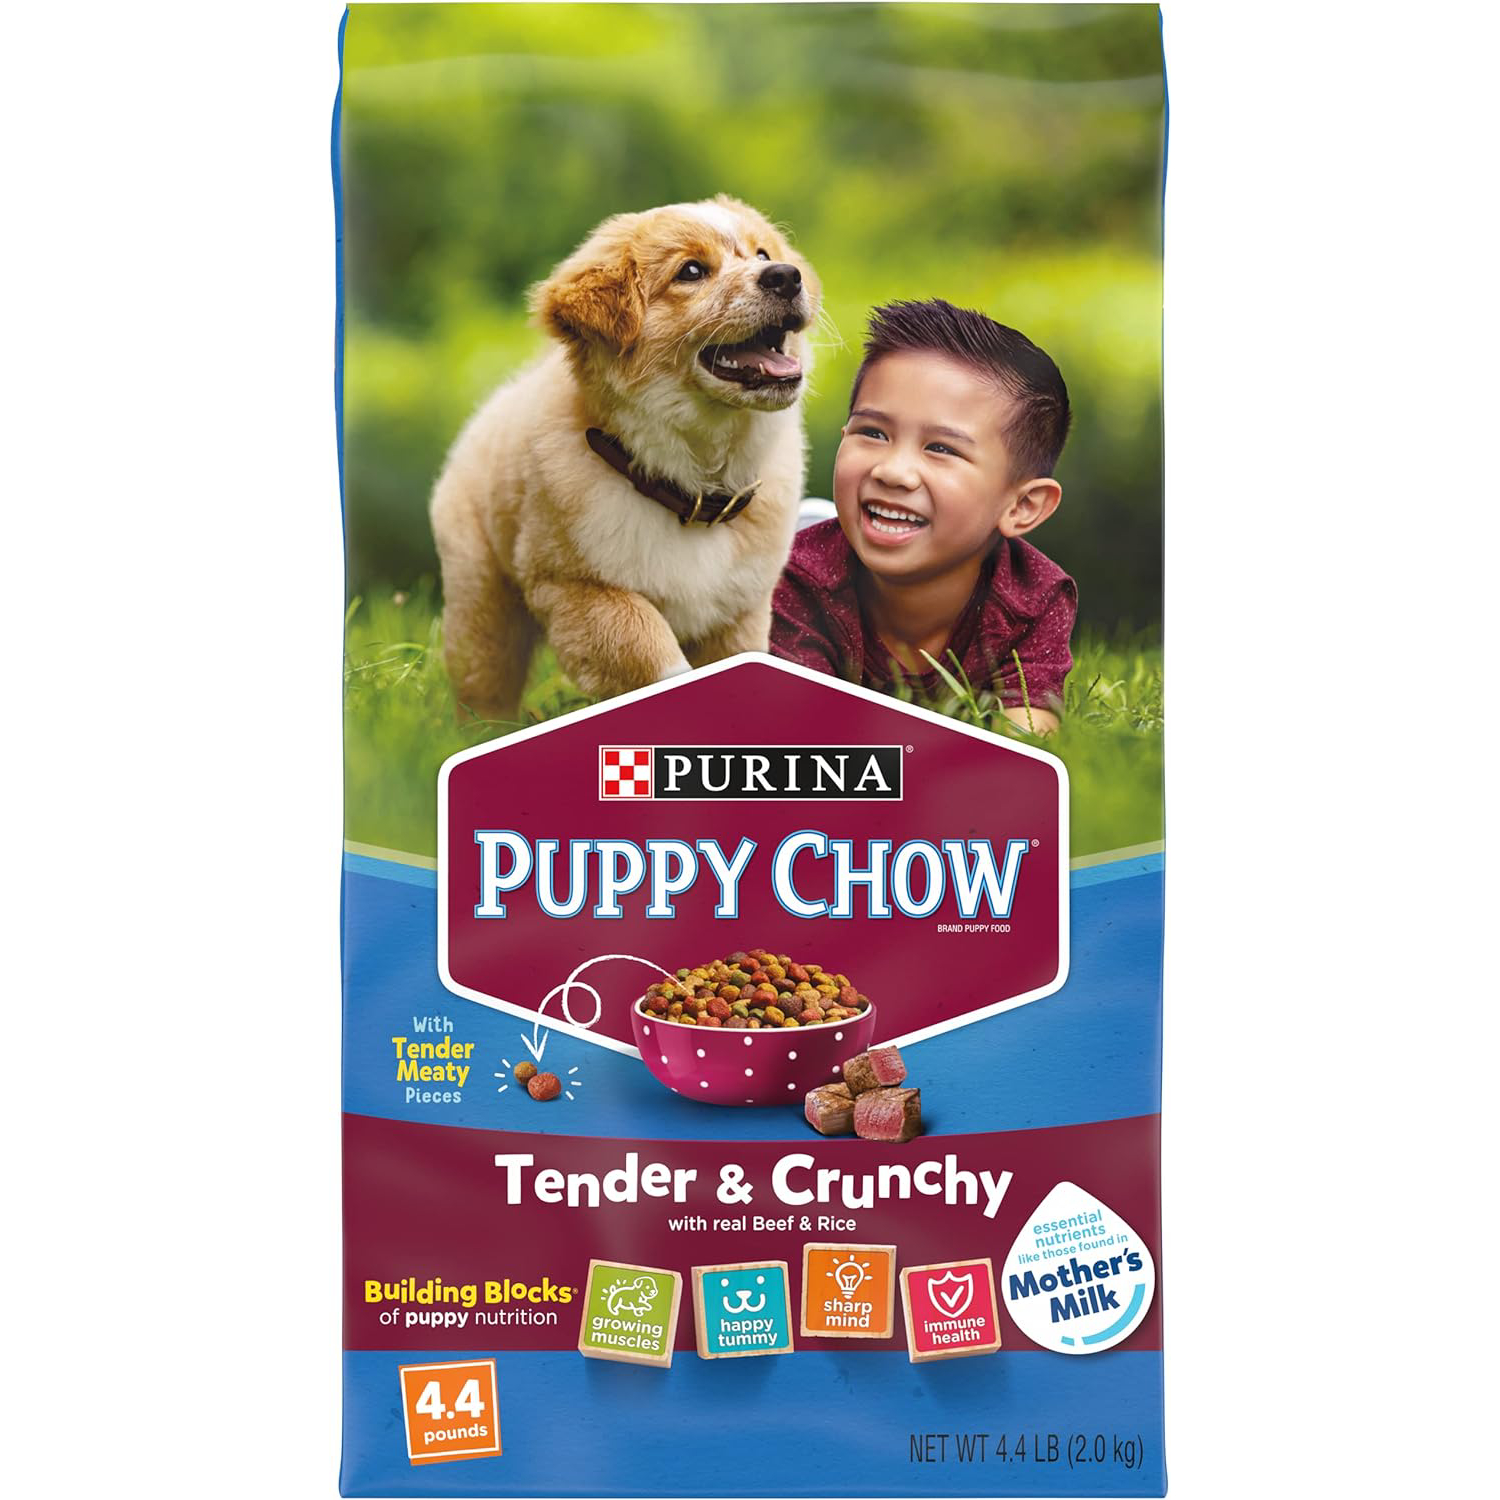 New Project Purina, Puppy Chow High Protein Dry Puppy Food 